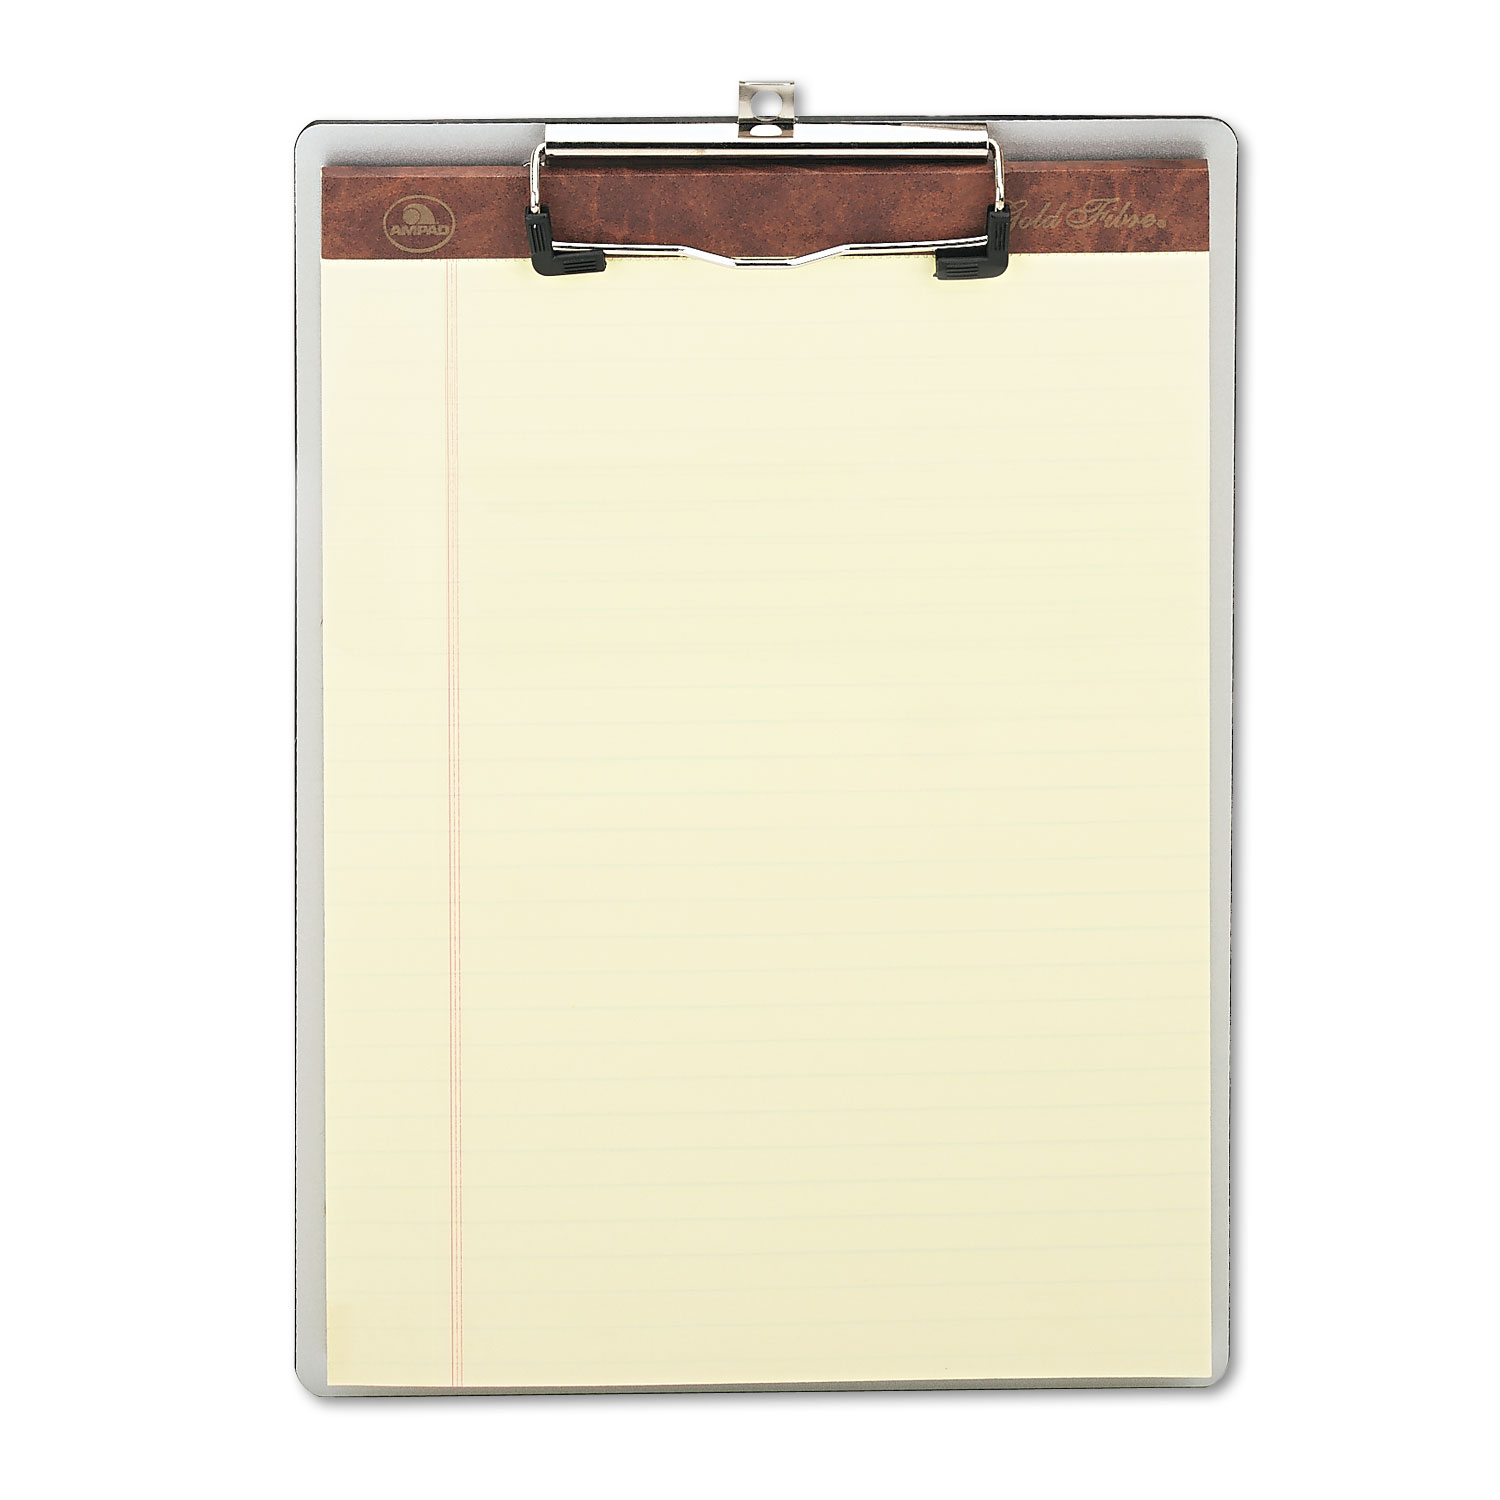 Universal Office Products Universal Hardboard Clipboard, 1 Capacity,  Holds 8 1/2 x 11, Brown, UNV40304